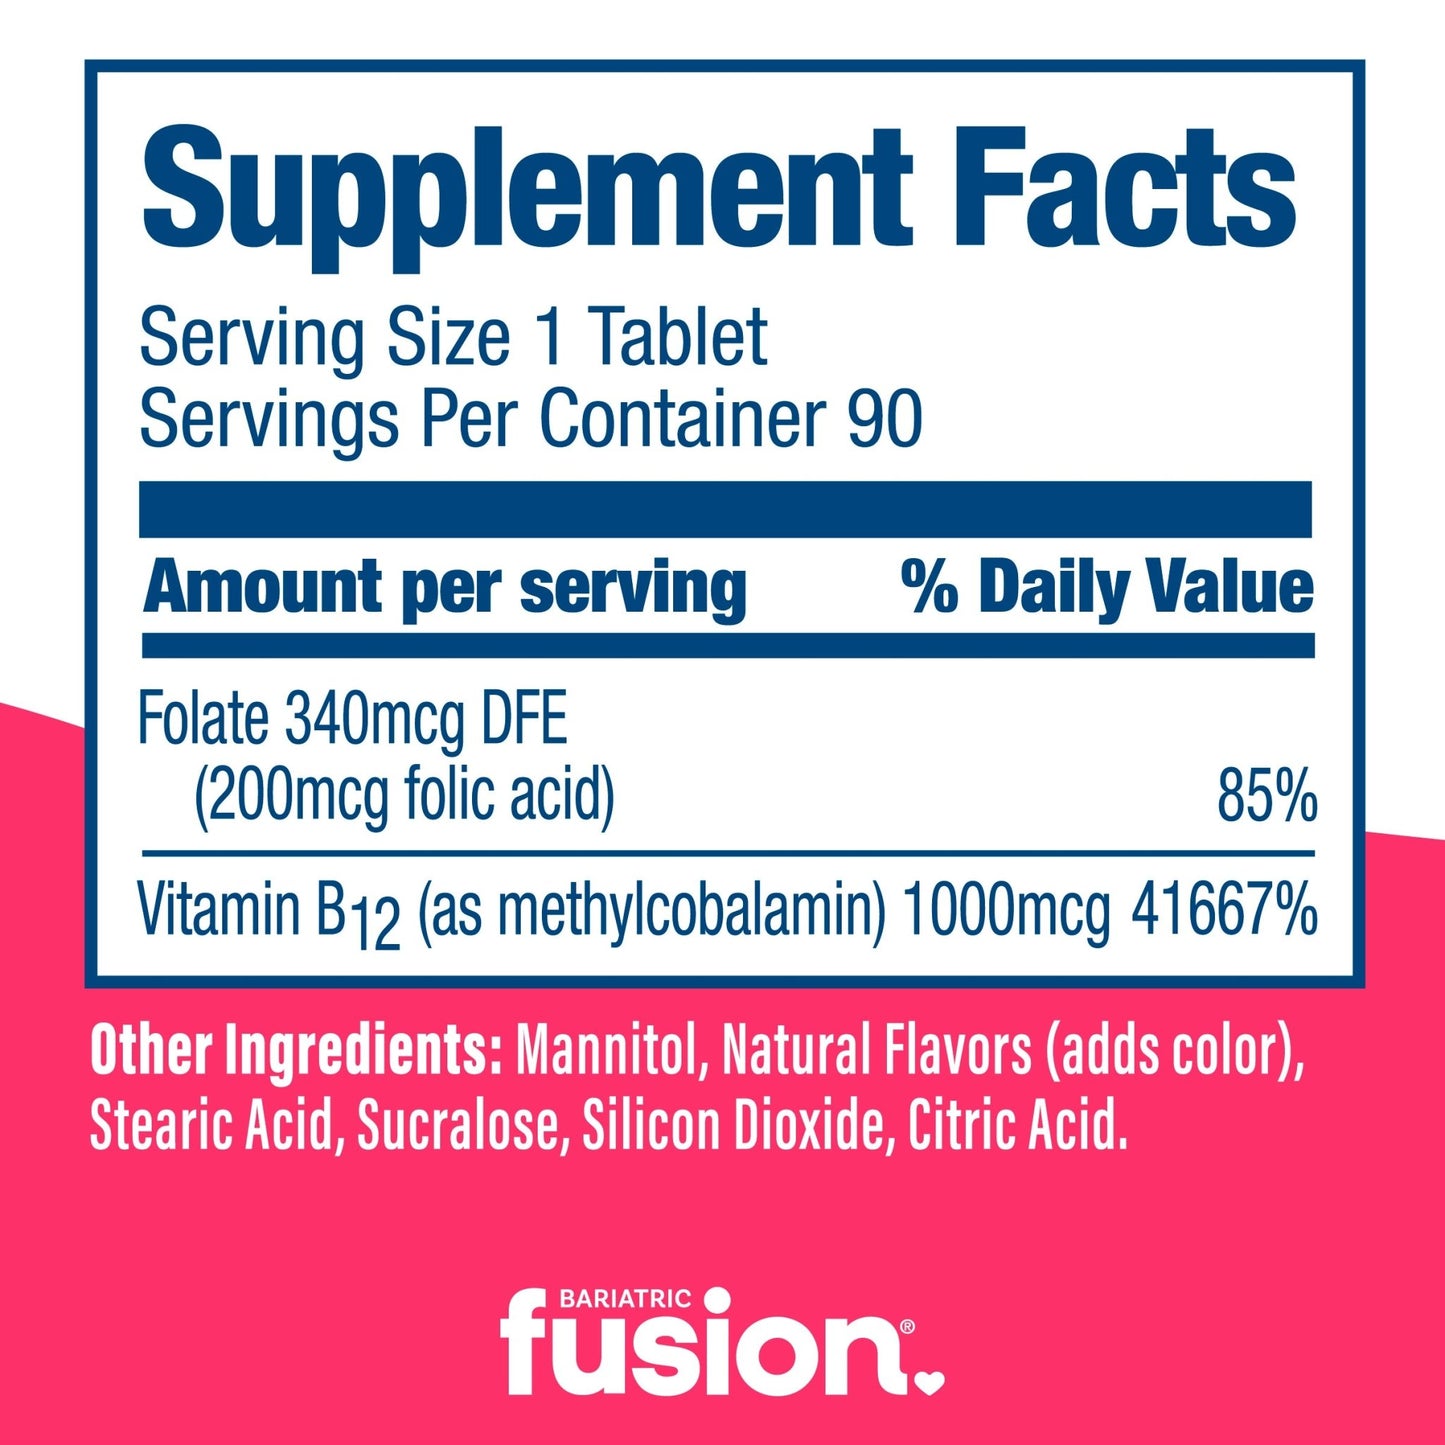 Bariatric Fusion Cherry-Berry Vitamin B12 Quick Melt 90 tablets supplement facts.